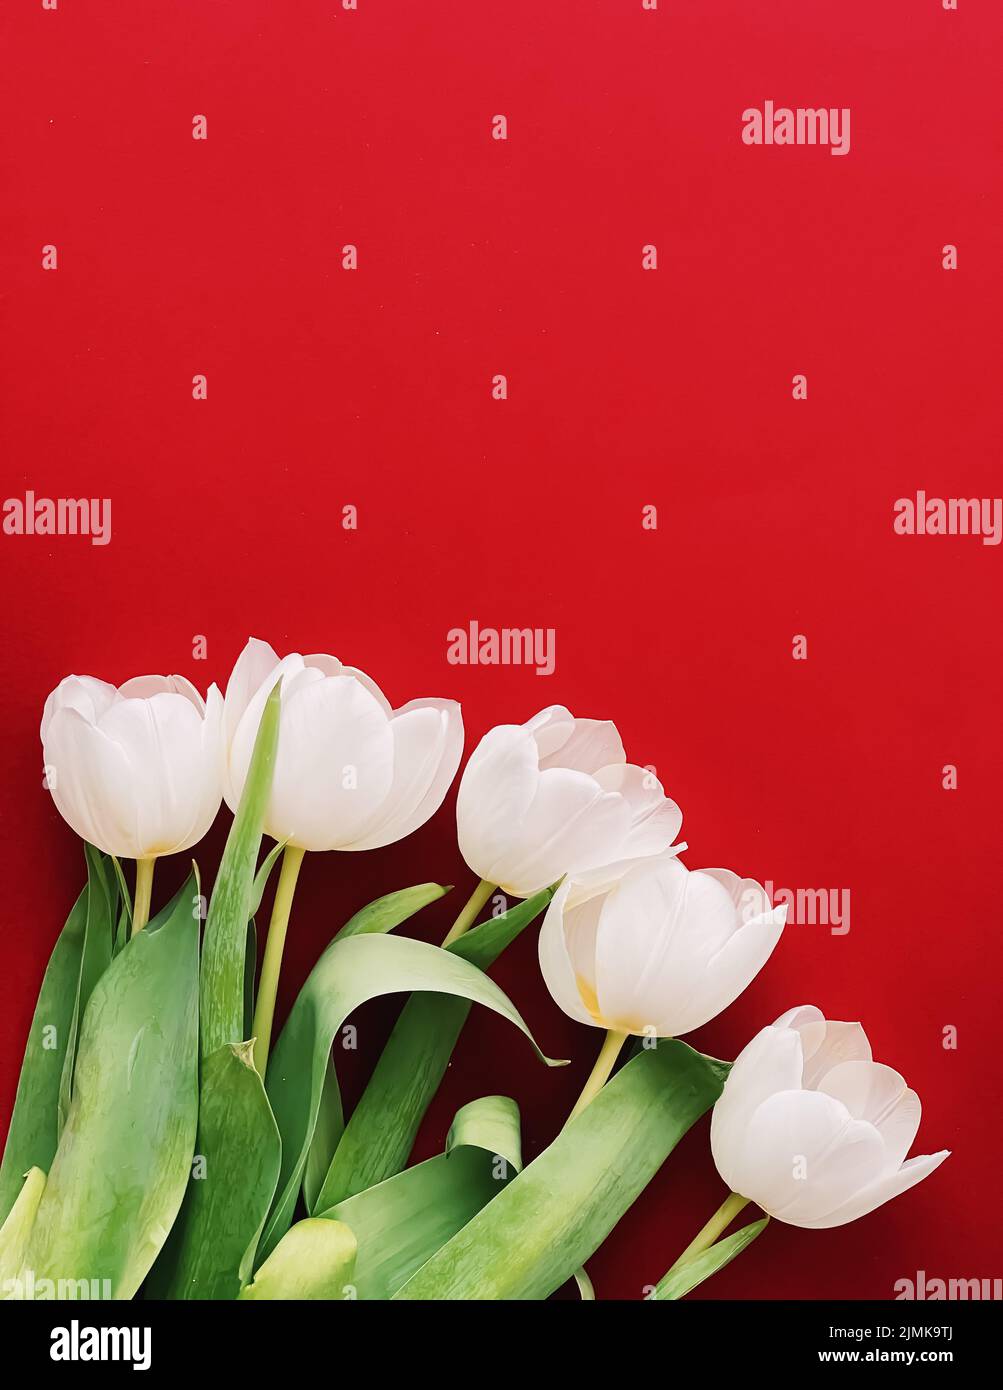 White tulips on red backdrop, beautiful flowers as flatlay background, floral Stock Photo